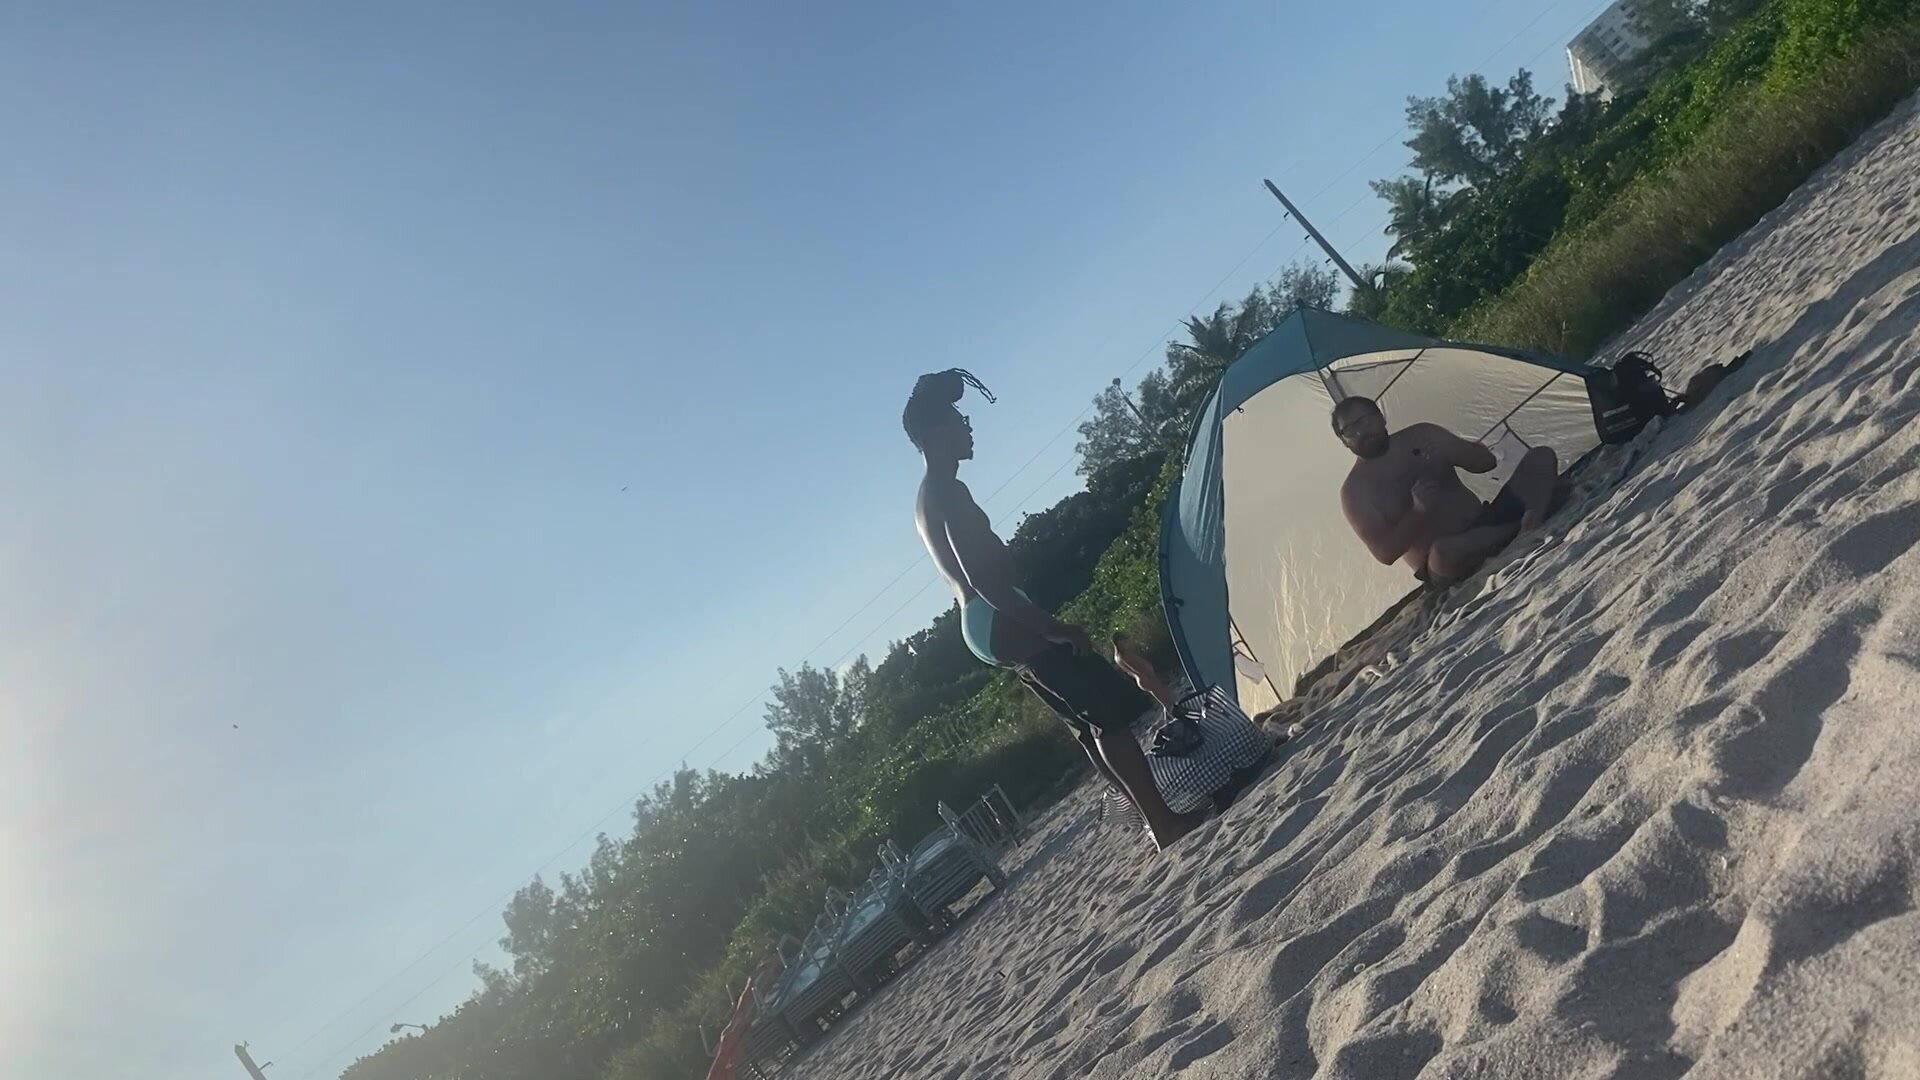 Guy stripping down at the beach.